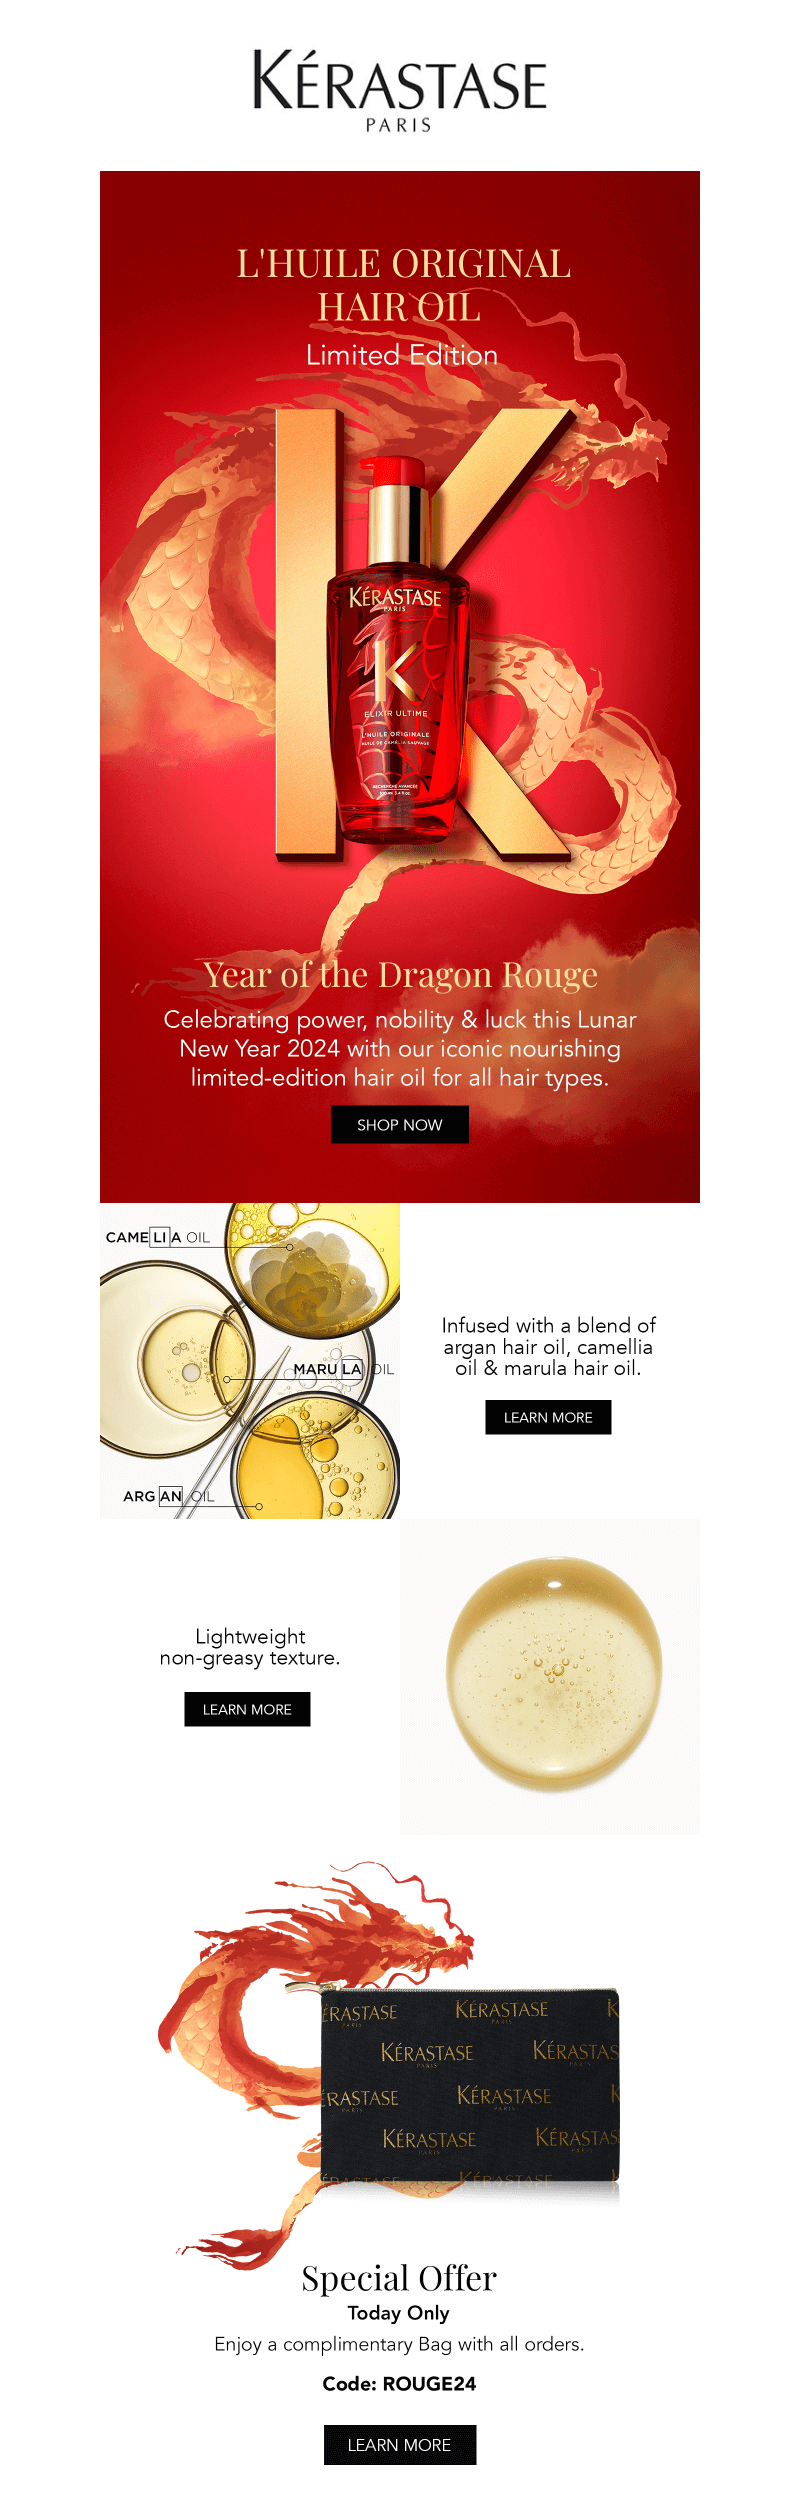 A Lunar New Year email from Kerastase featuring a limited edition product against the Lunar New Year-themed backdrop in the hero image